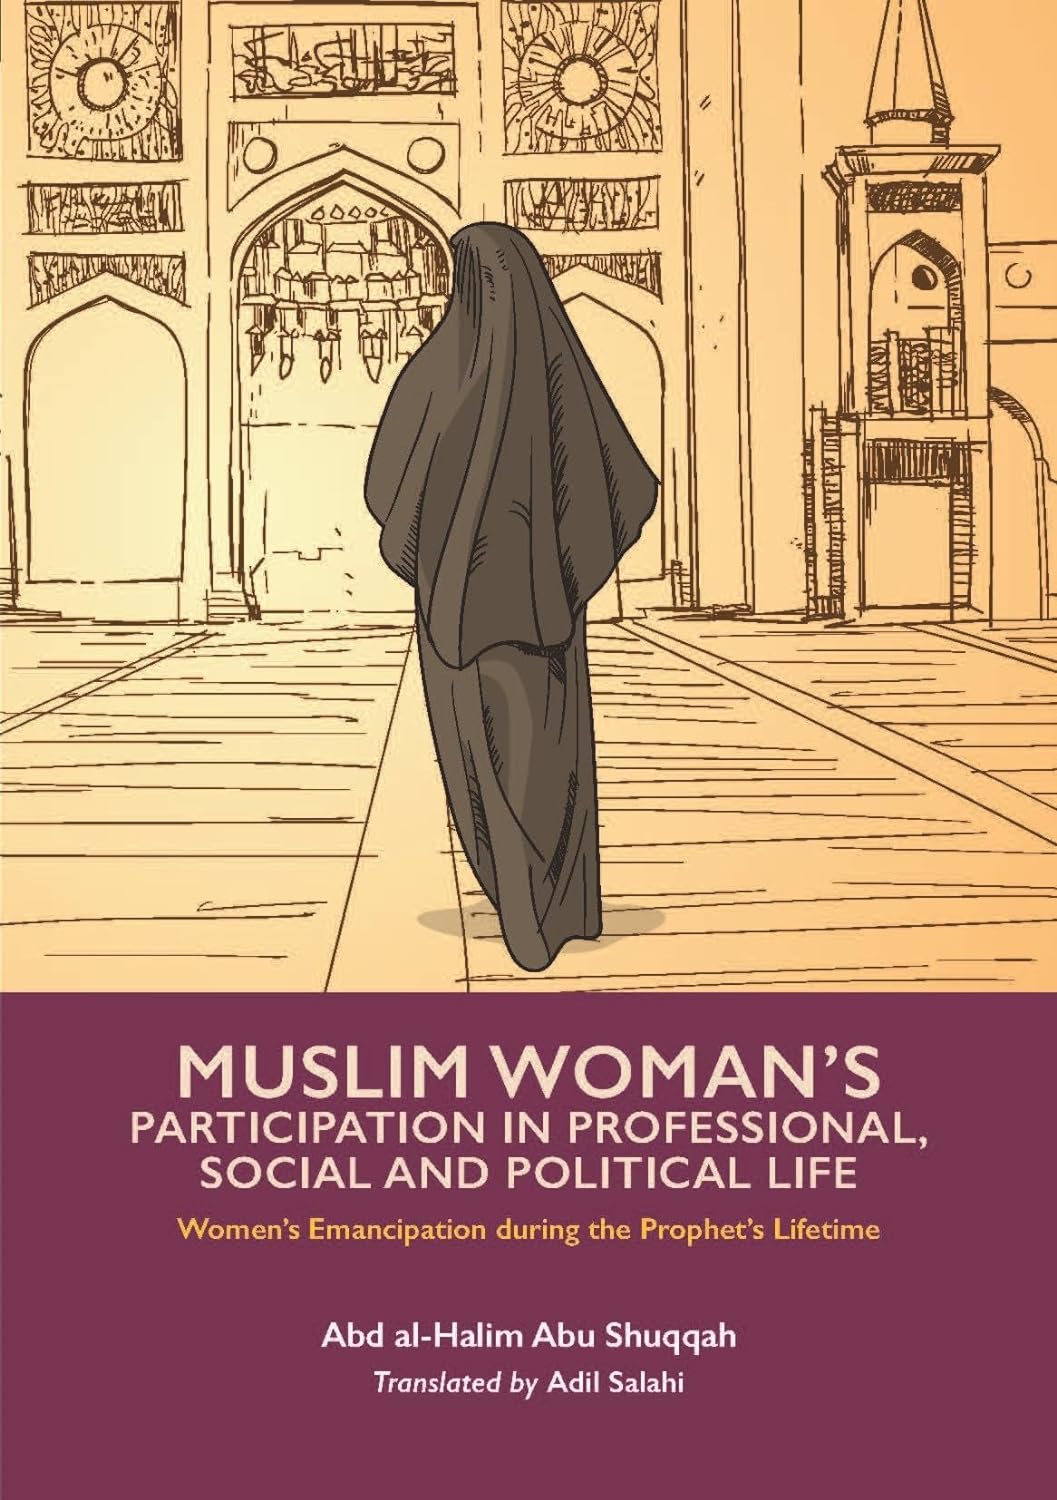 Muslim Women's Participation in Professional, Social and Political Life| Women's Emancipation during the Prophet's Lifetime Volume 3/8